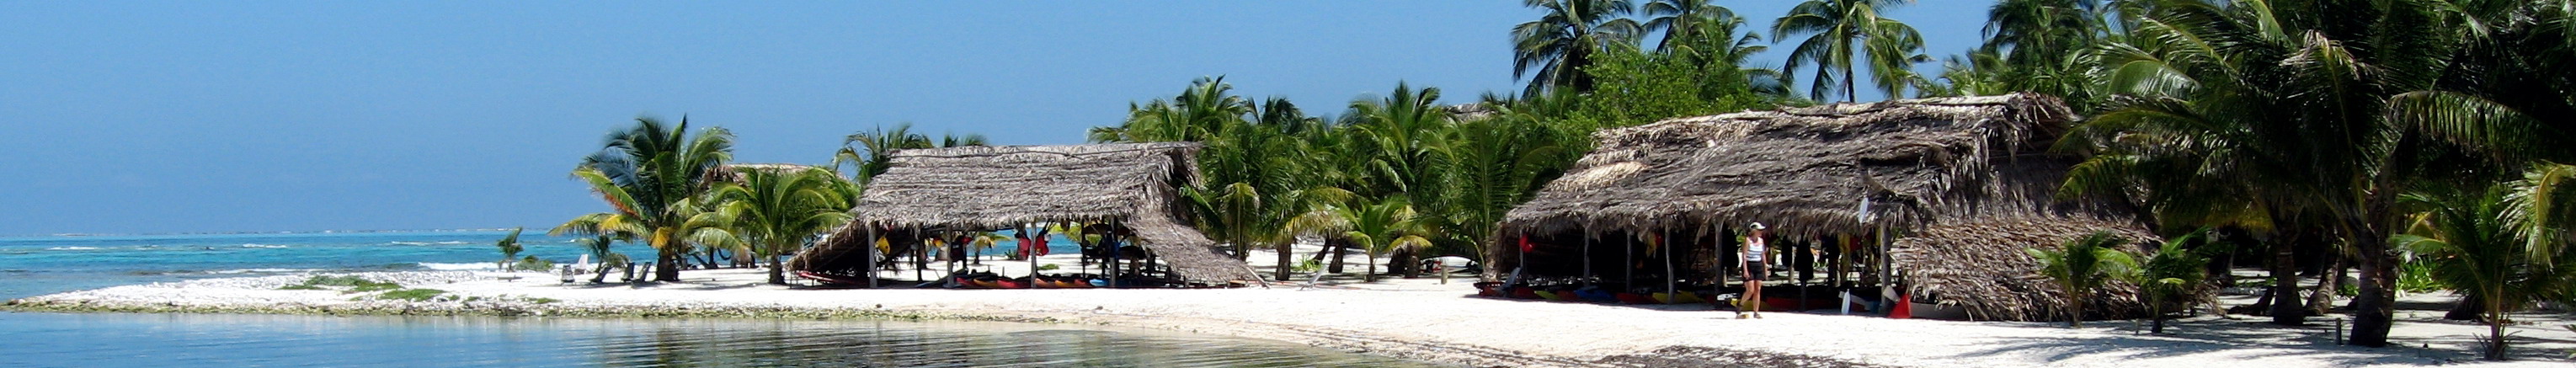 Belize banner Caye with beach huts and palm trees.jpg. 